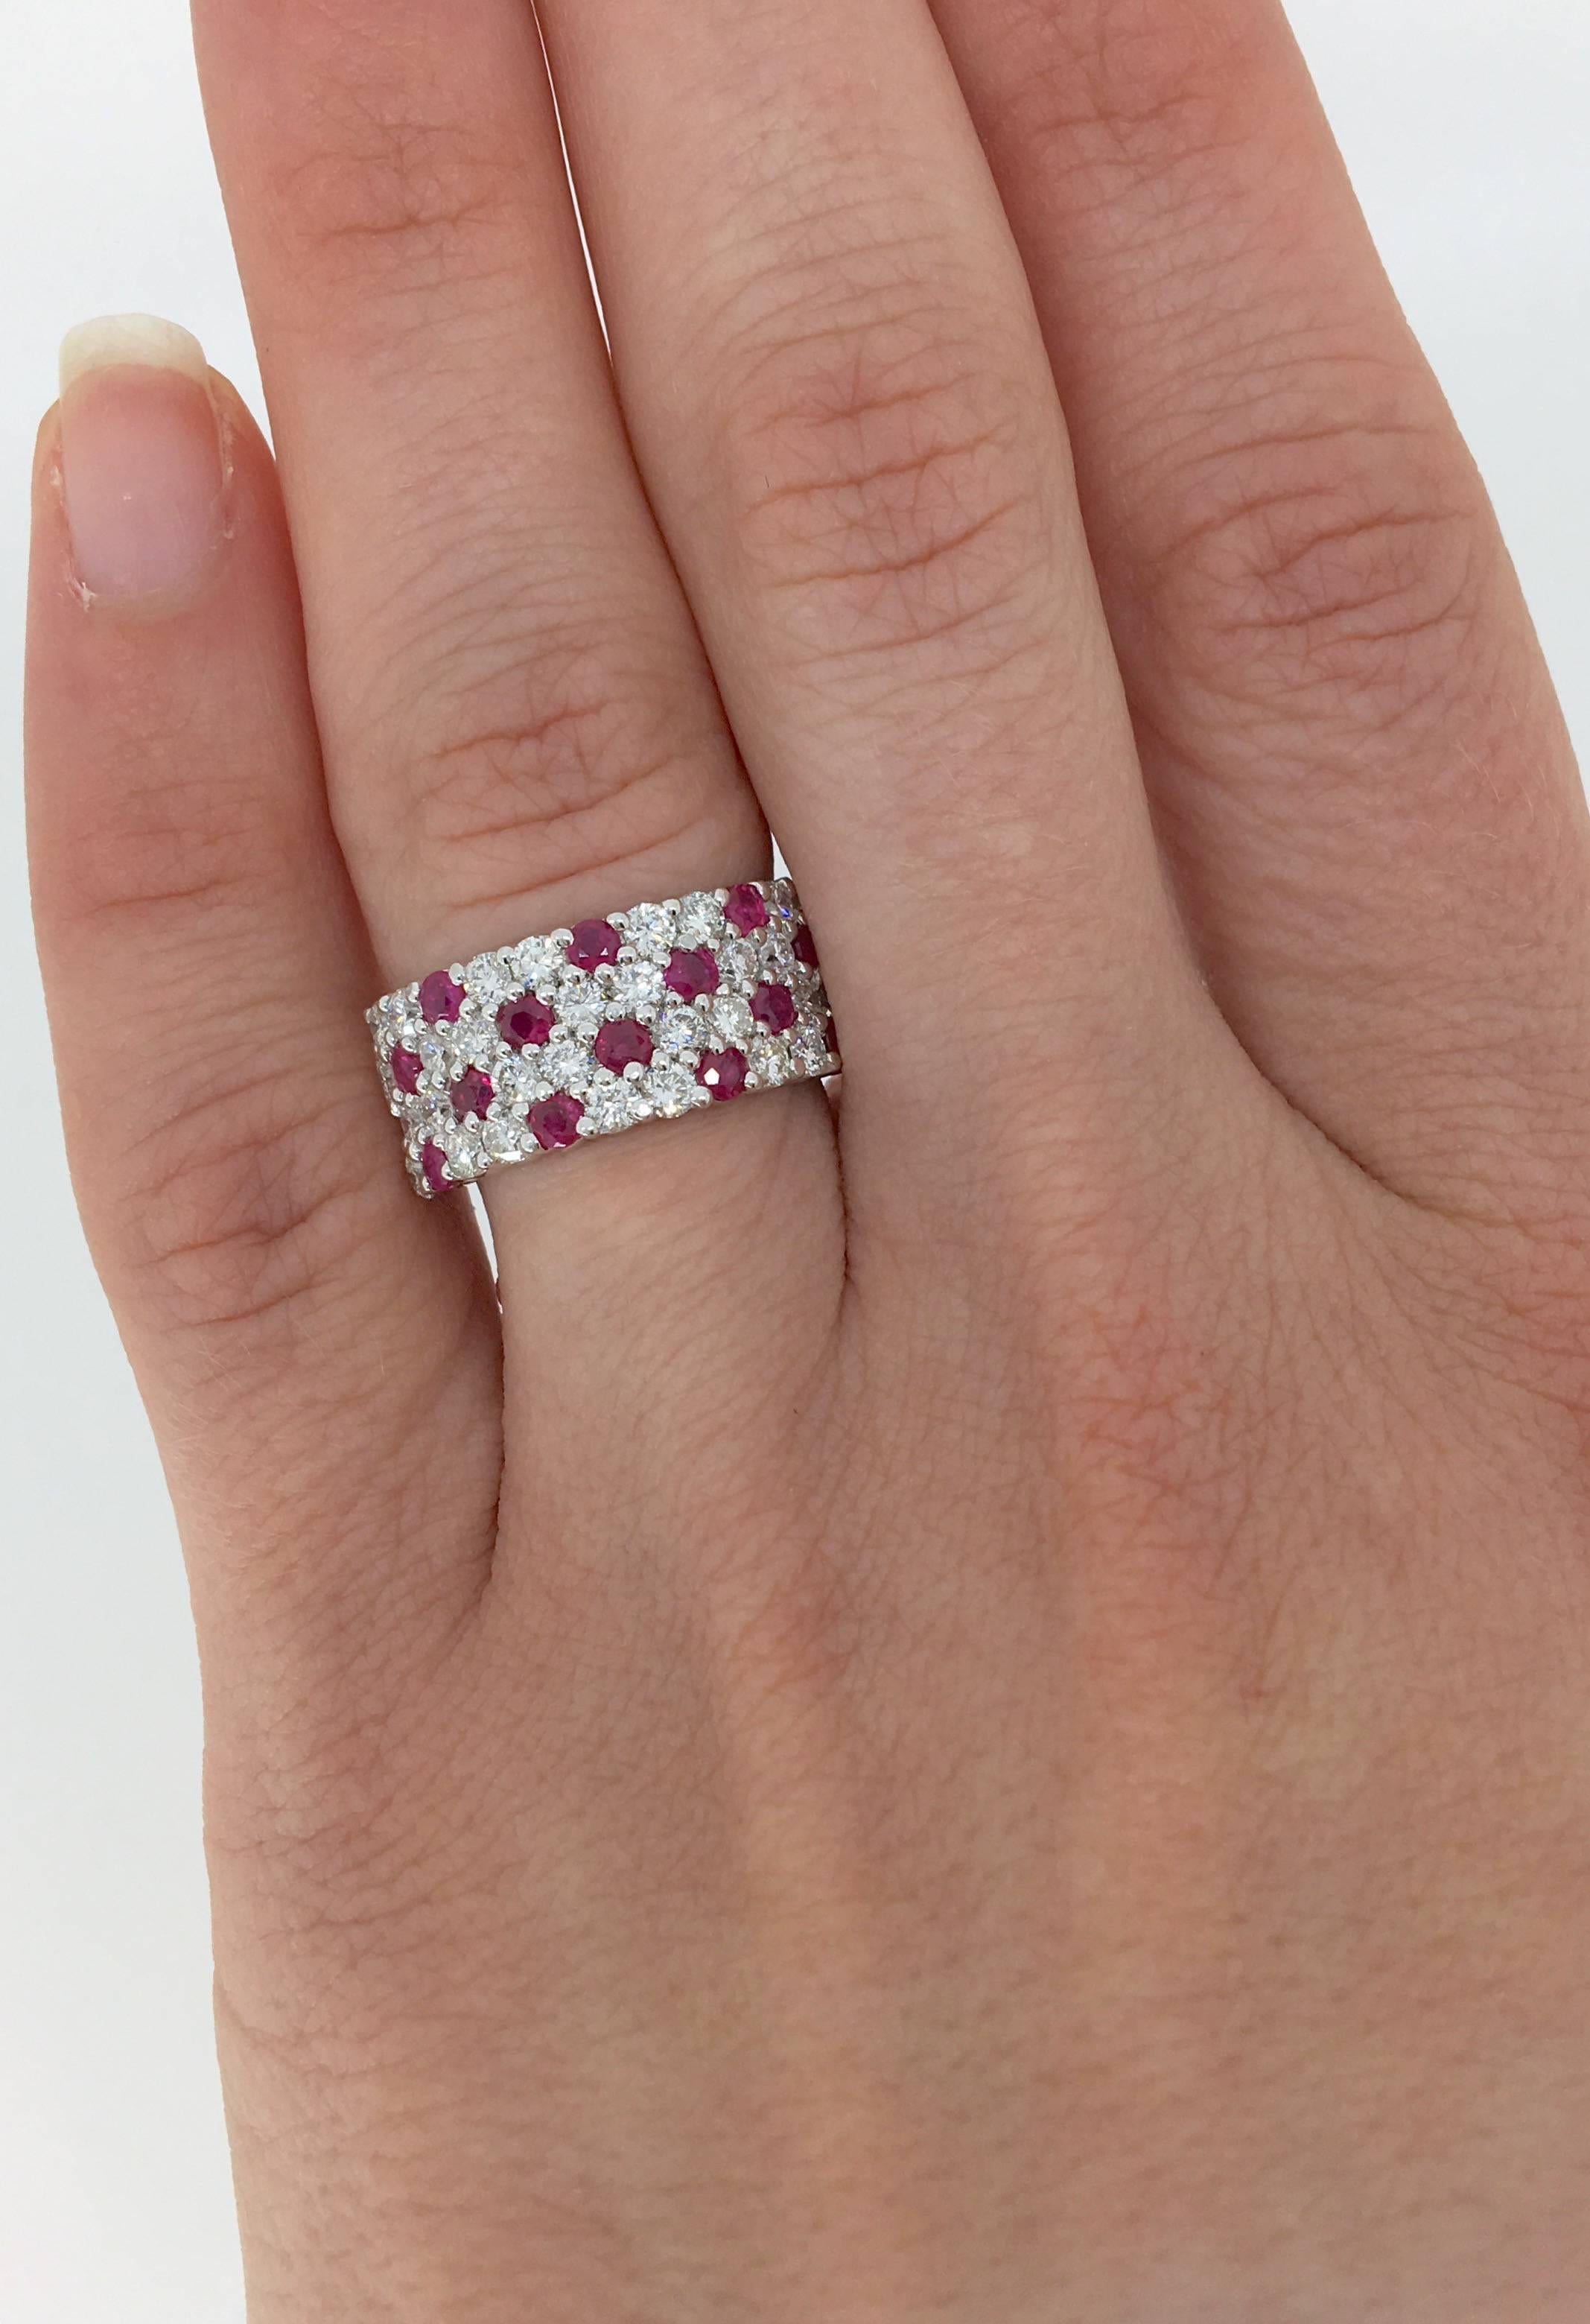 14K white gold ring features 32 Round Brilliant Cut Diamonds and 14 Round Rubies evenly spaced across the band. The gorgeous ring houses approximately 1.60CTW of diamonds. The ring is currently a size 6.5 and weighs 6.2 grams.